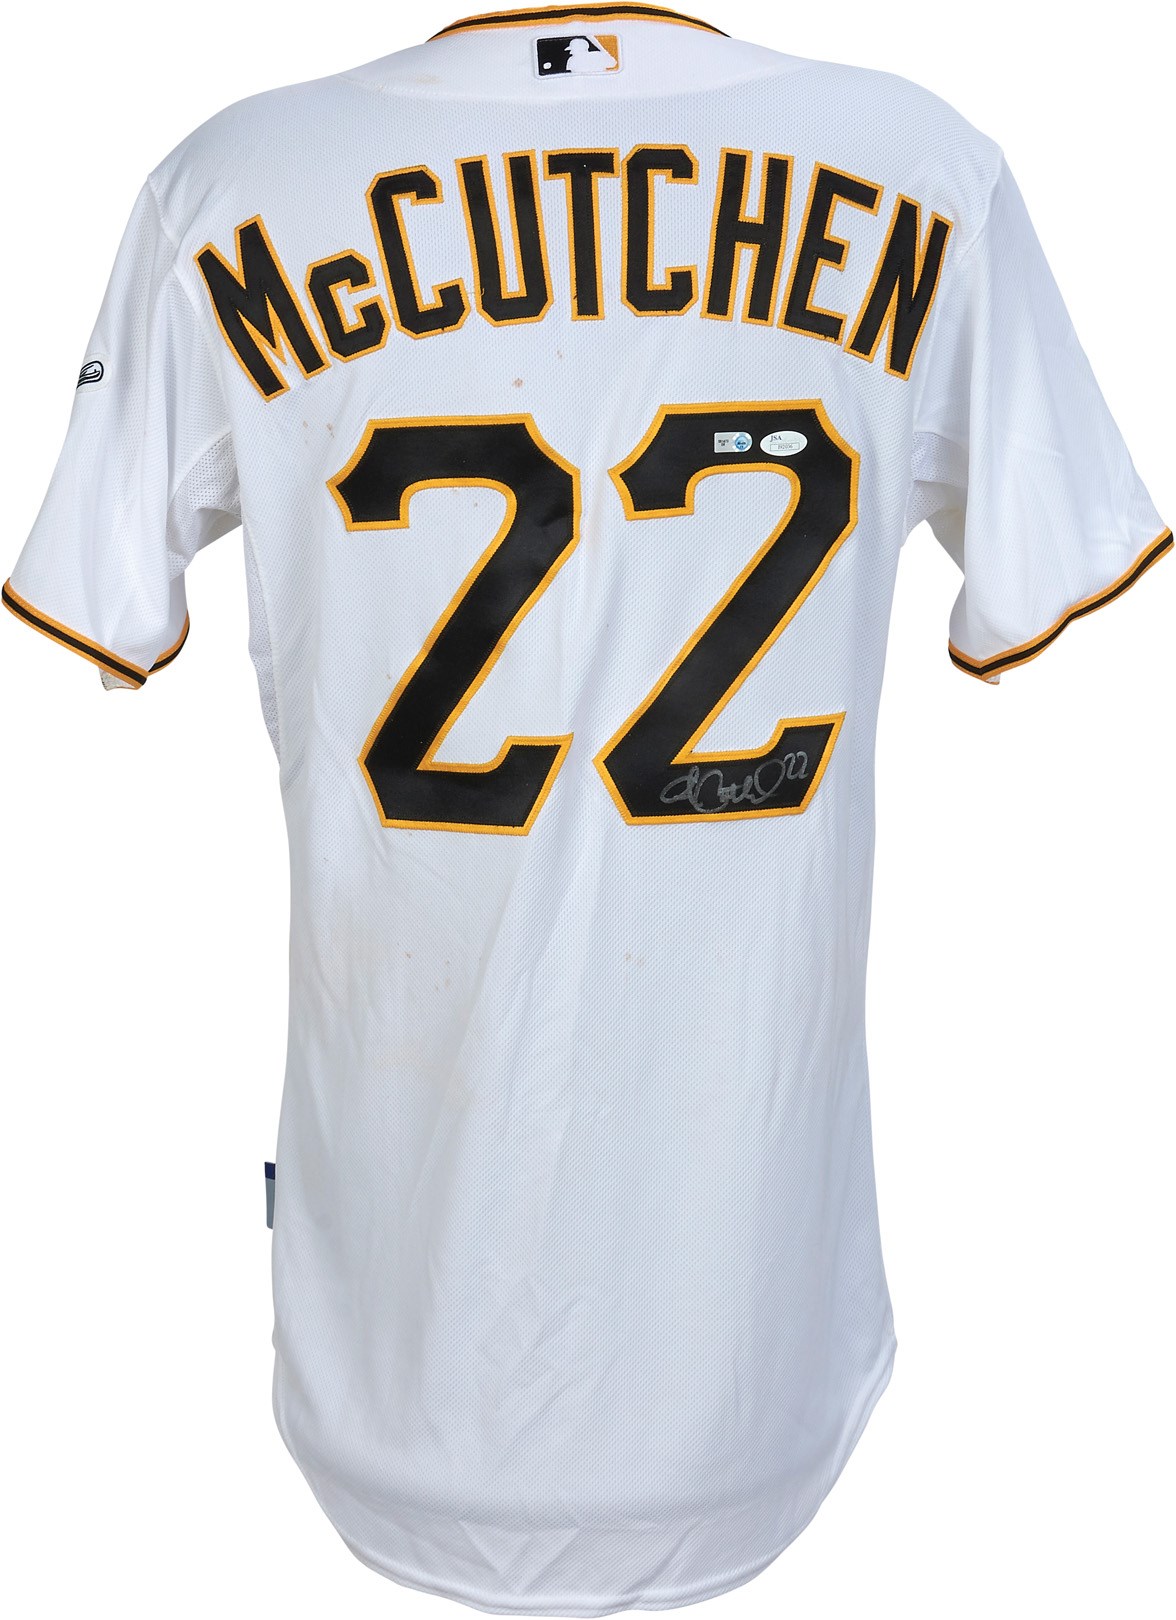 2013 MVP Andrew McCutchen Game Worn & Signed Pirates Jersey (MLB Auth. & Photo-Matched)